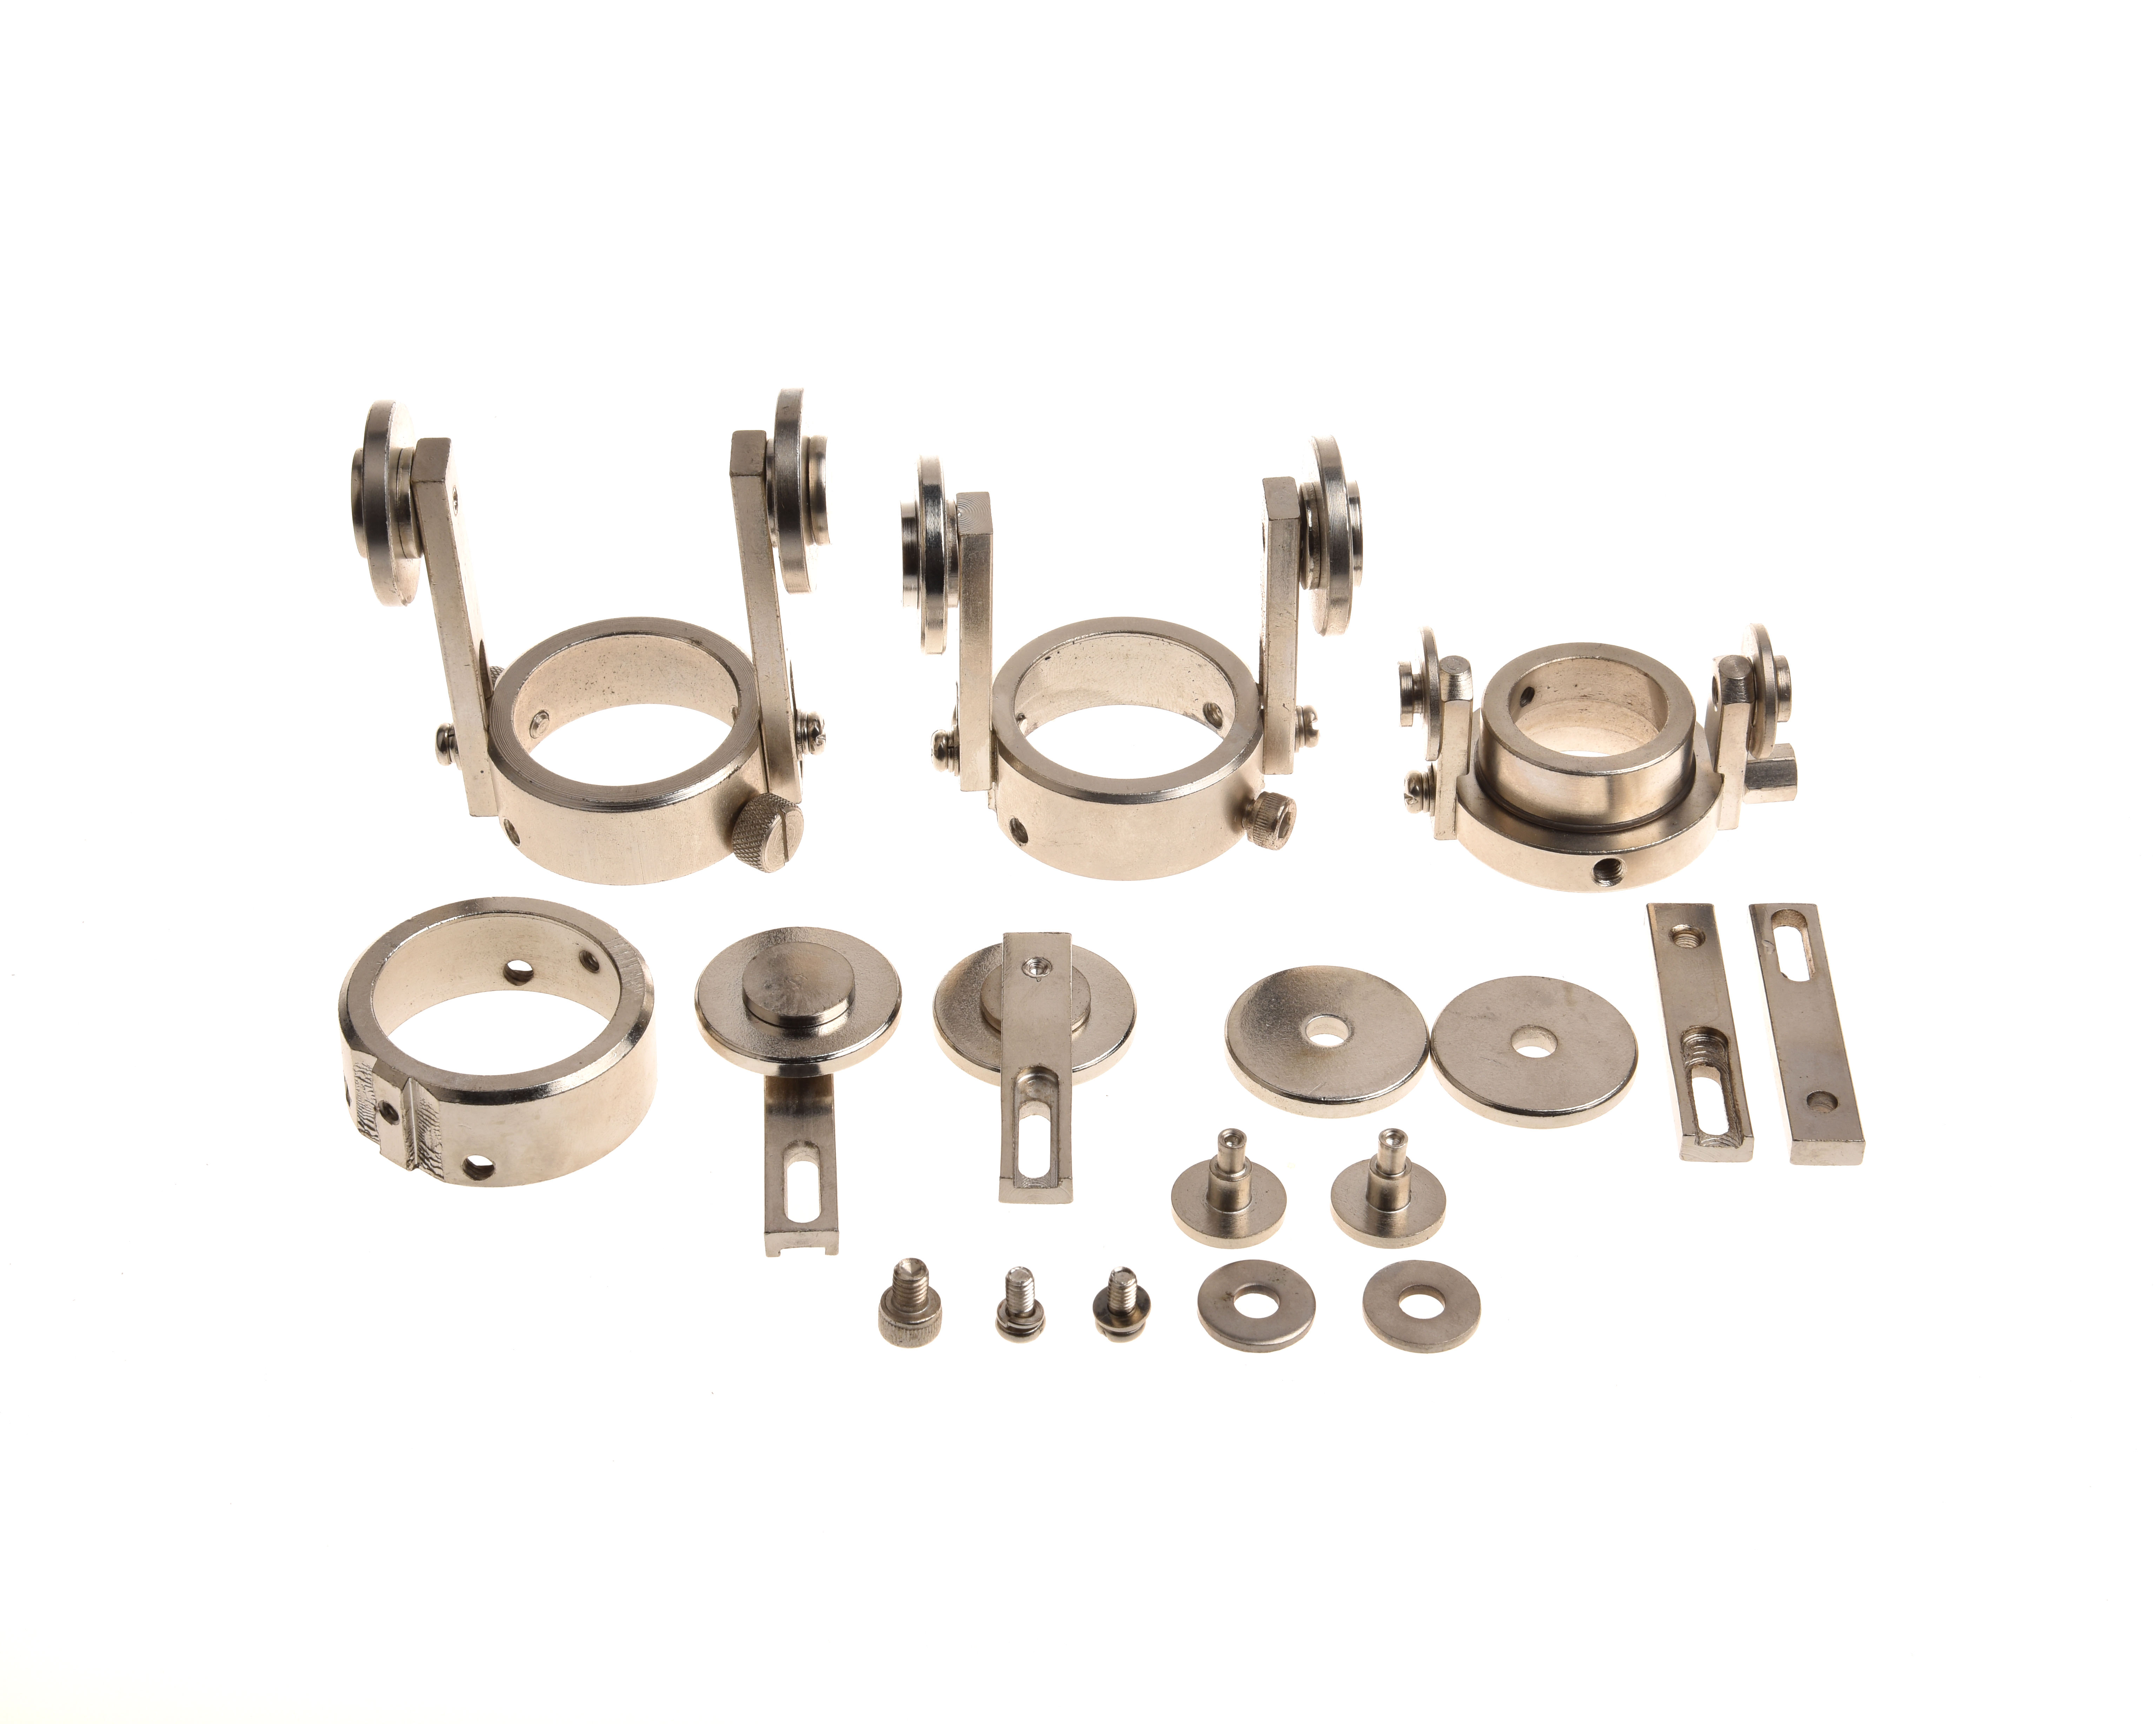 OEM steel stainless steel machining assembly metal parts with plating